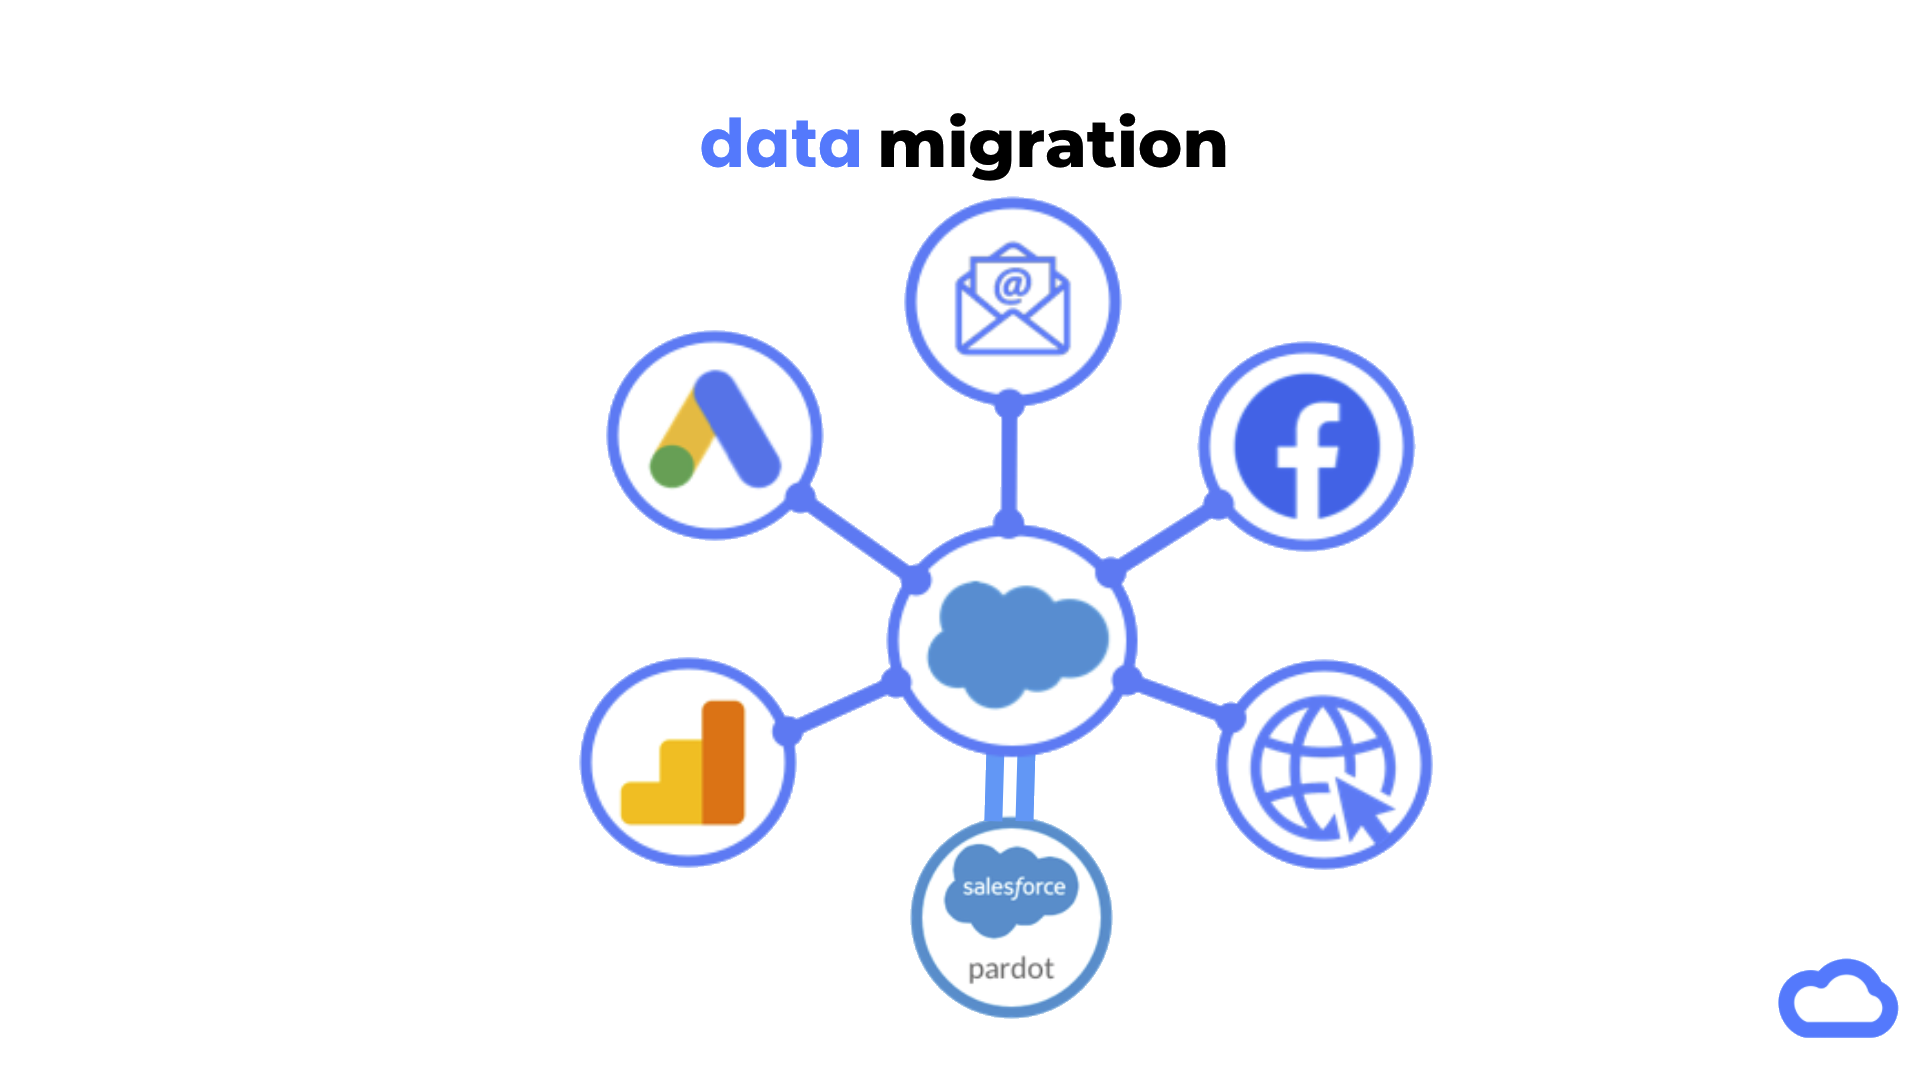 Forcery can migrate data from ETL tools, data lakes, databases and any other source using an attribute-driven design methodology